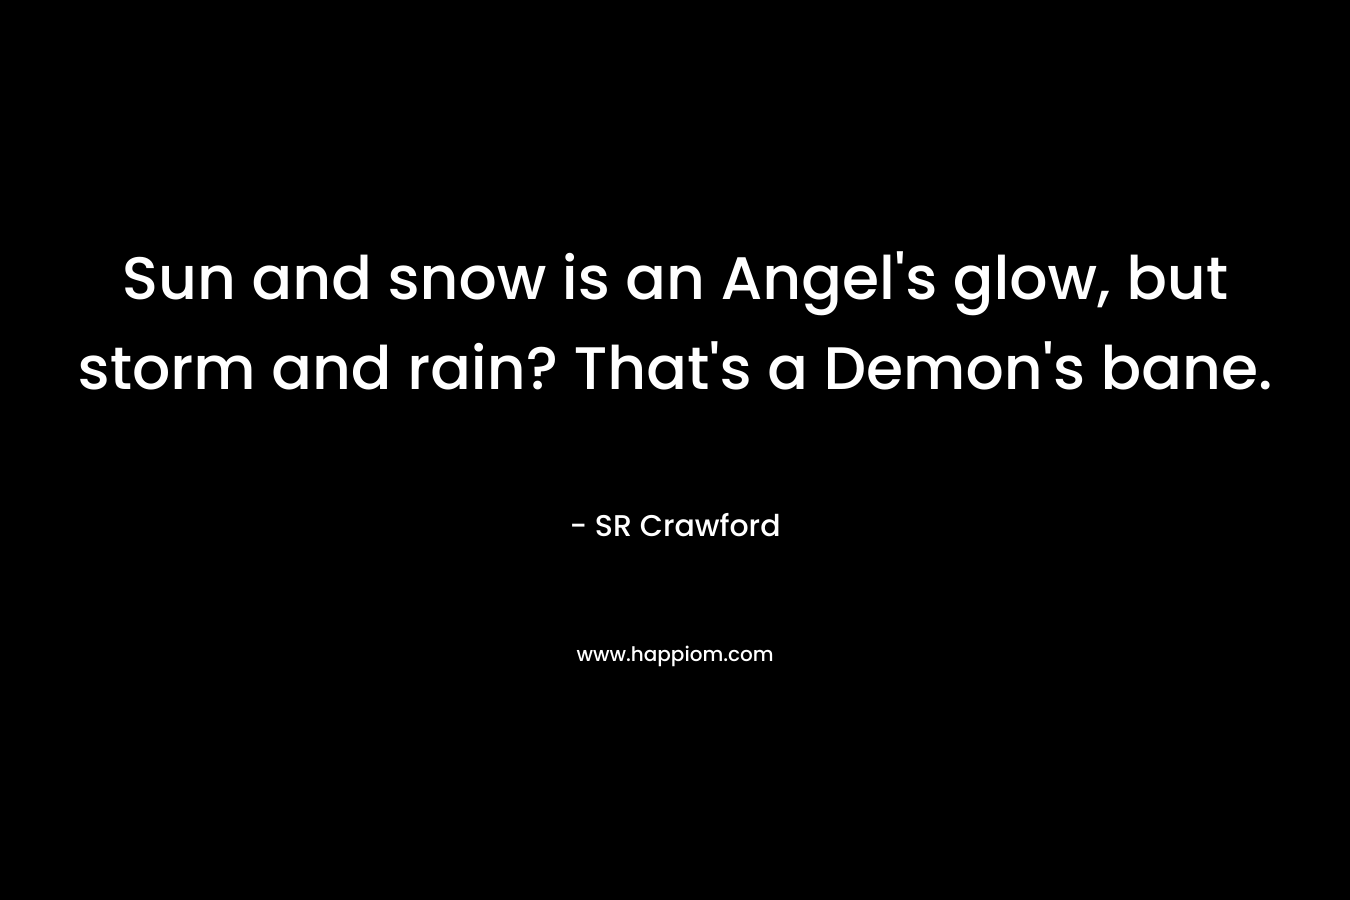 Sun and snow is an Angel's glow, but storm and rain? That's a Demon's bane.